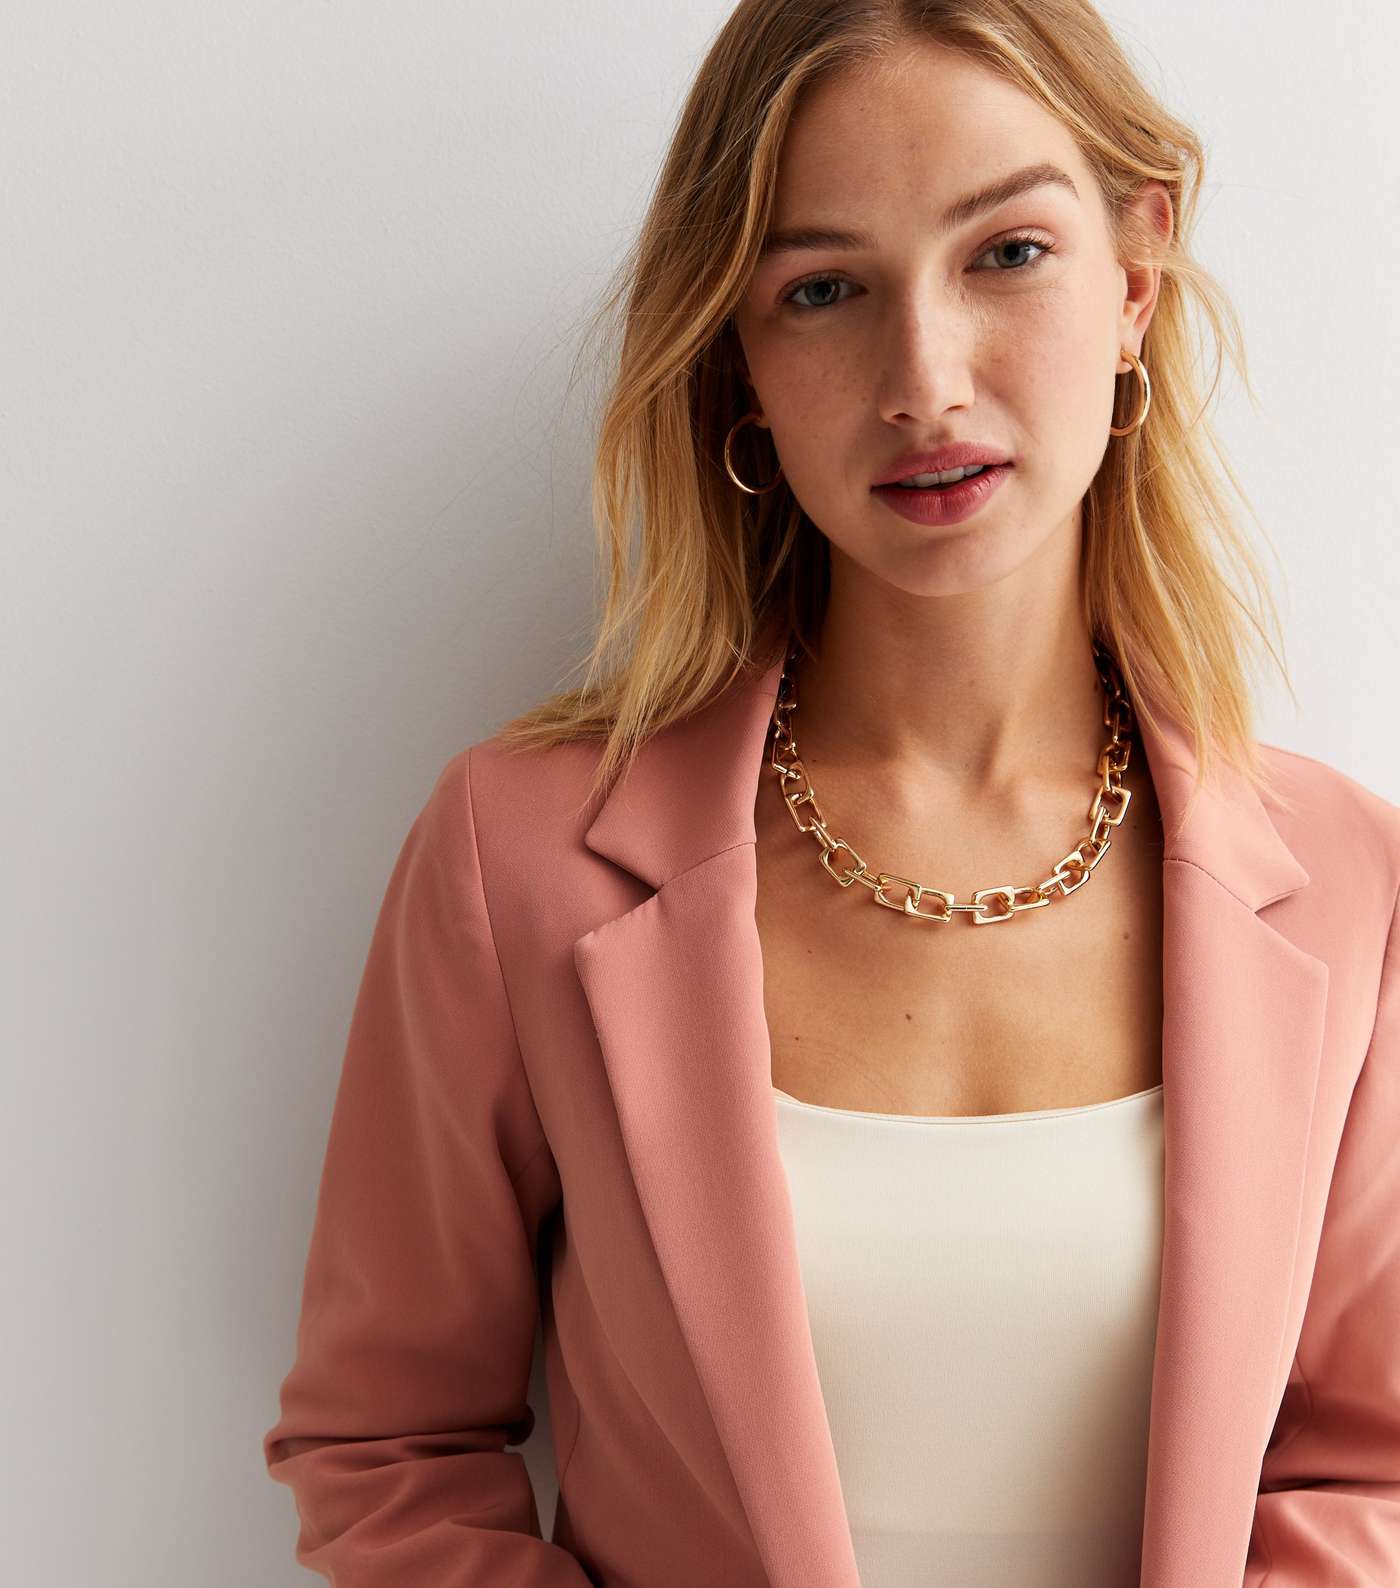 Pale Pink Relaxed Fit Blazer Image 2